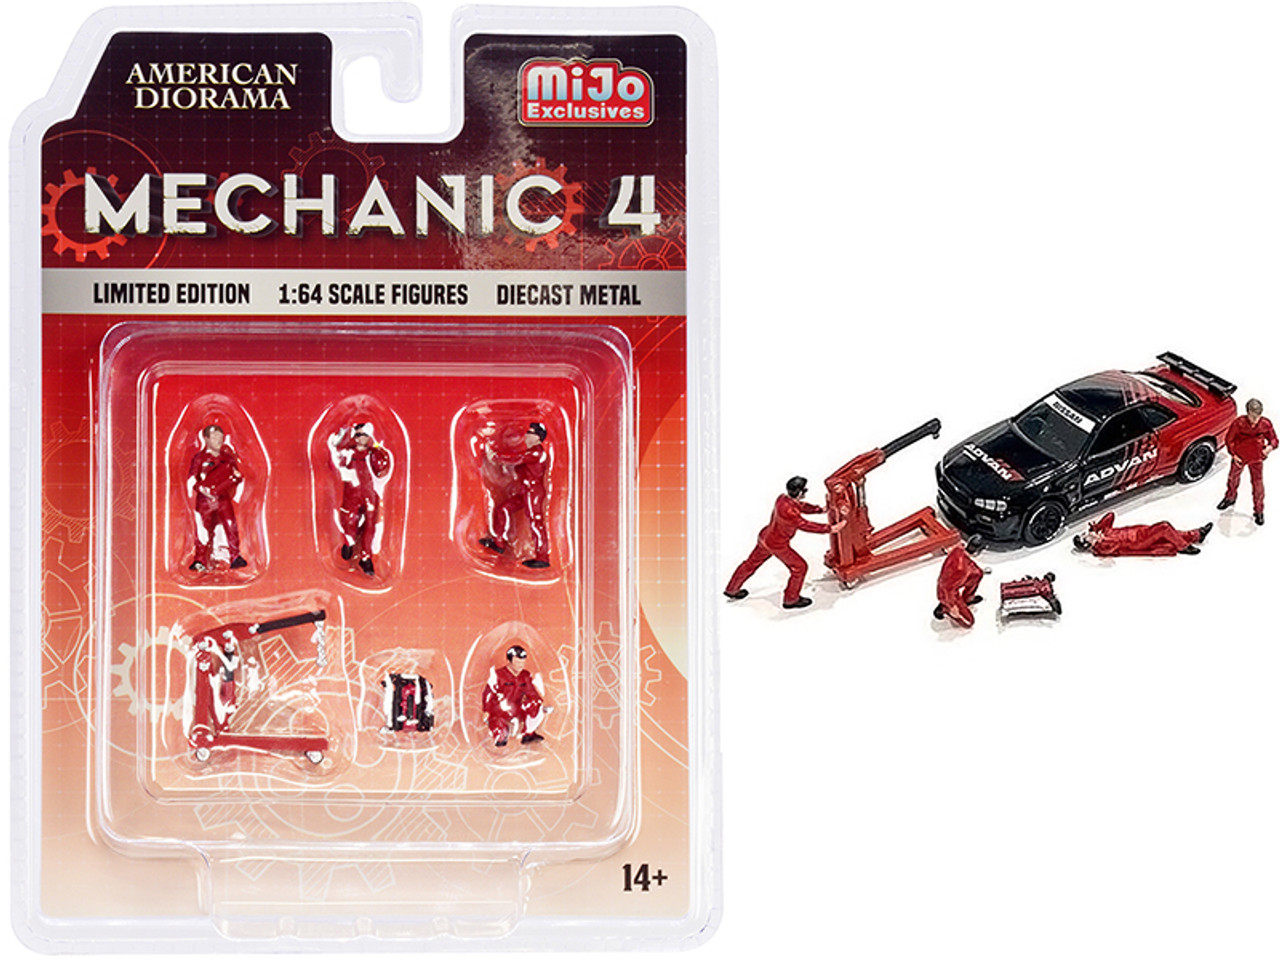 "Mechanic 4" 6 piece Diecast Set (4 Figurines and 2 Accessories) for 1/64 Scale Models by American Diorama